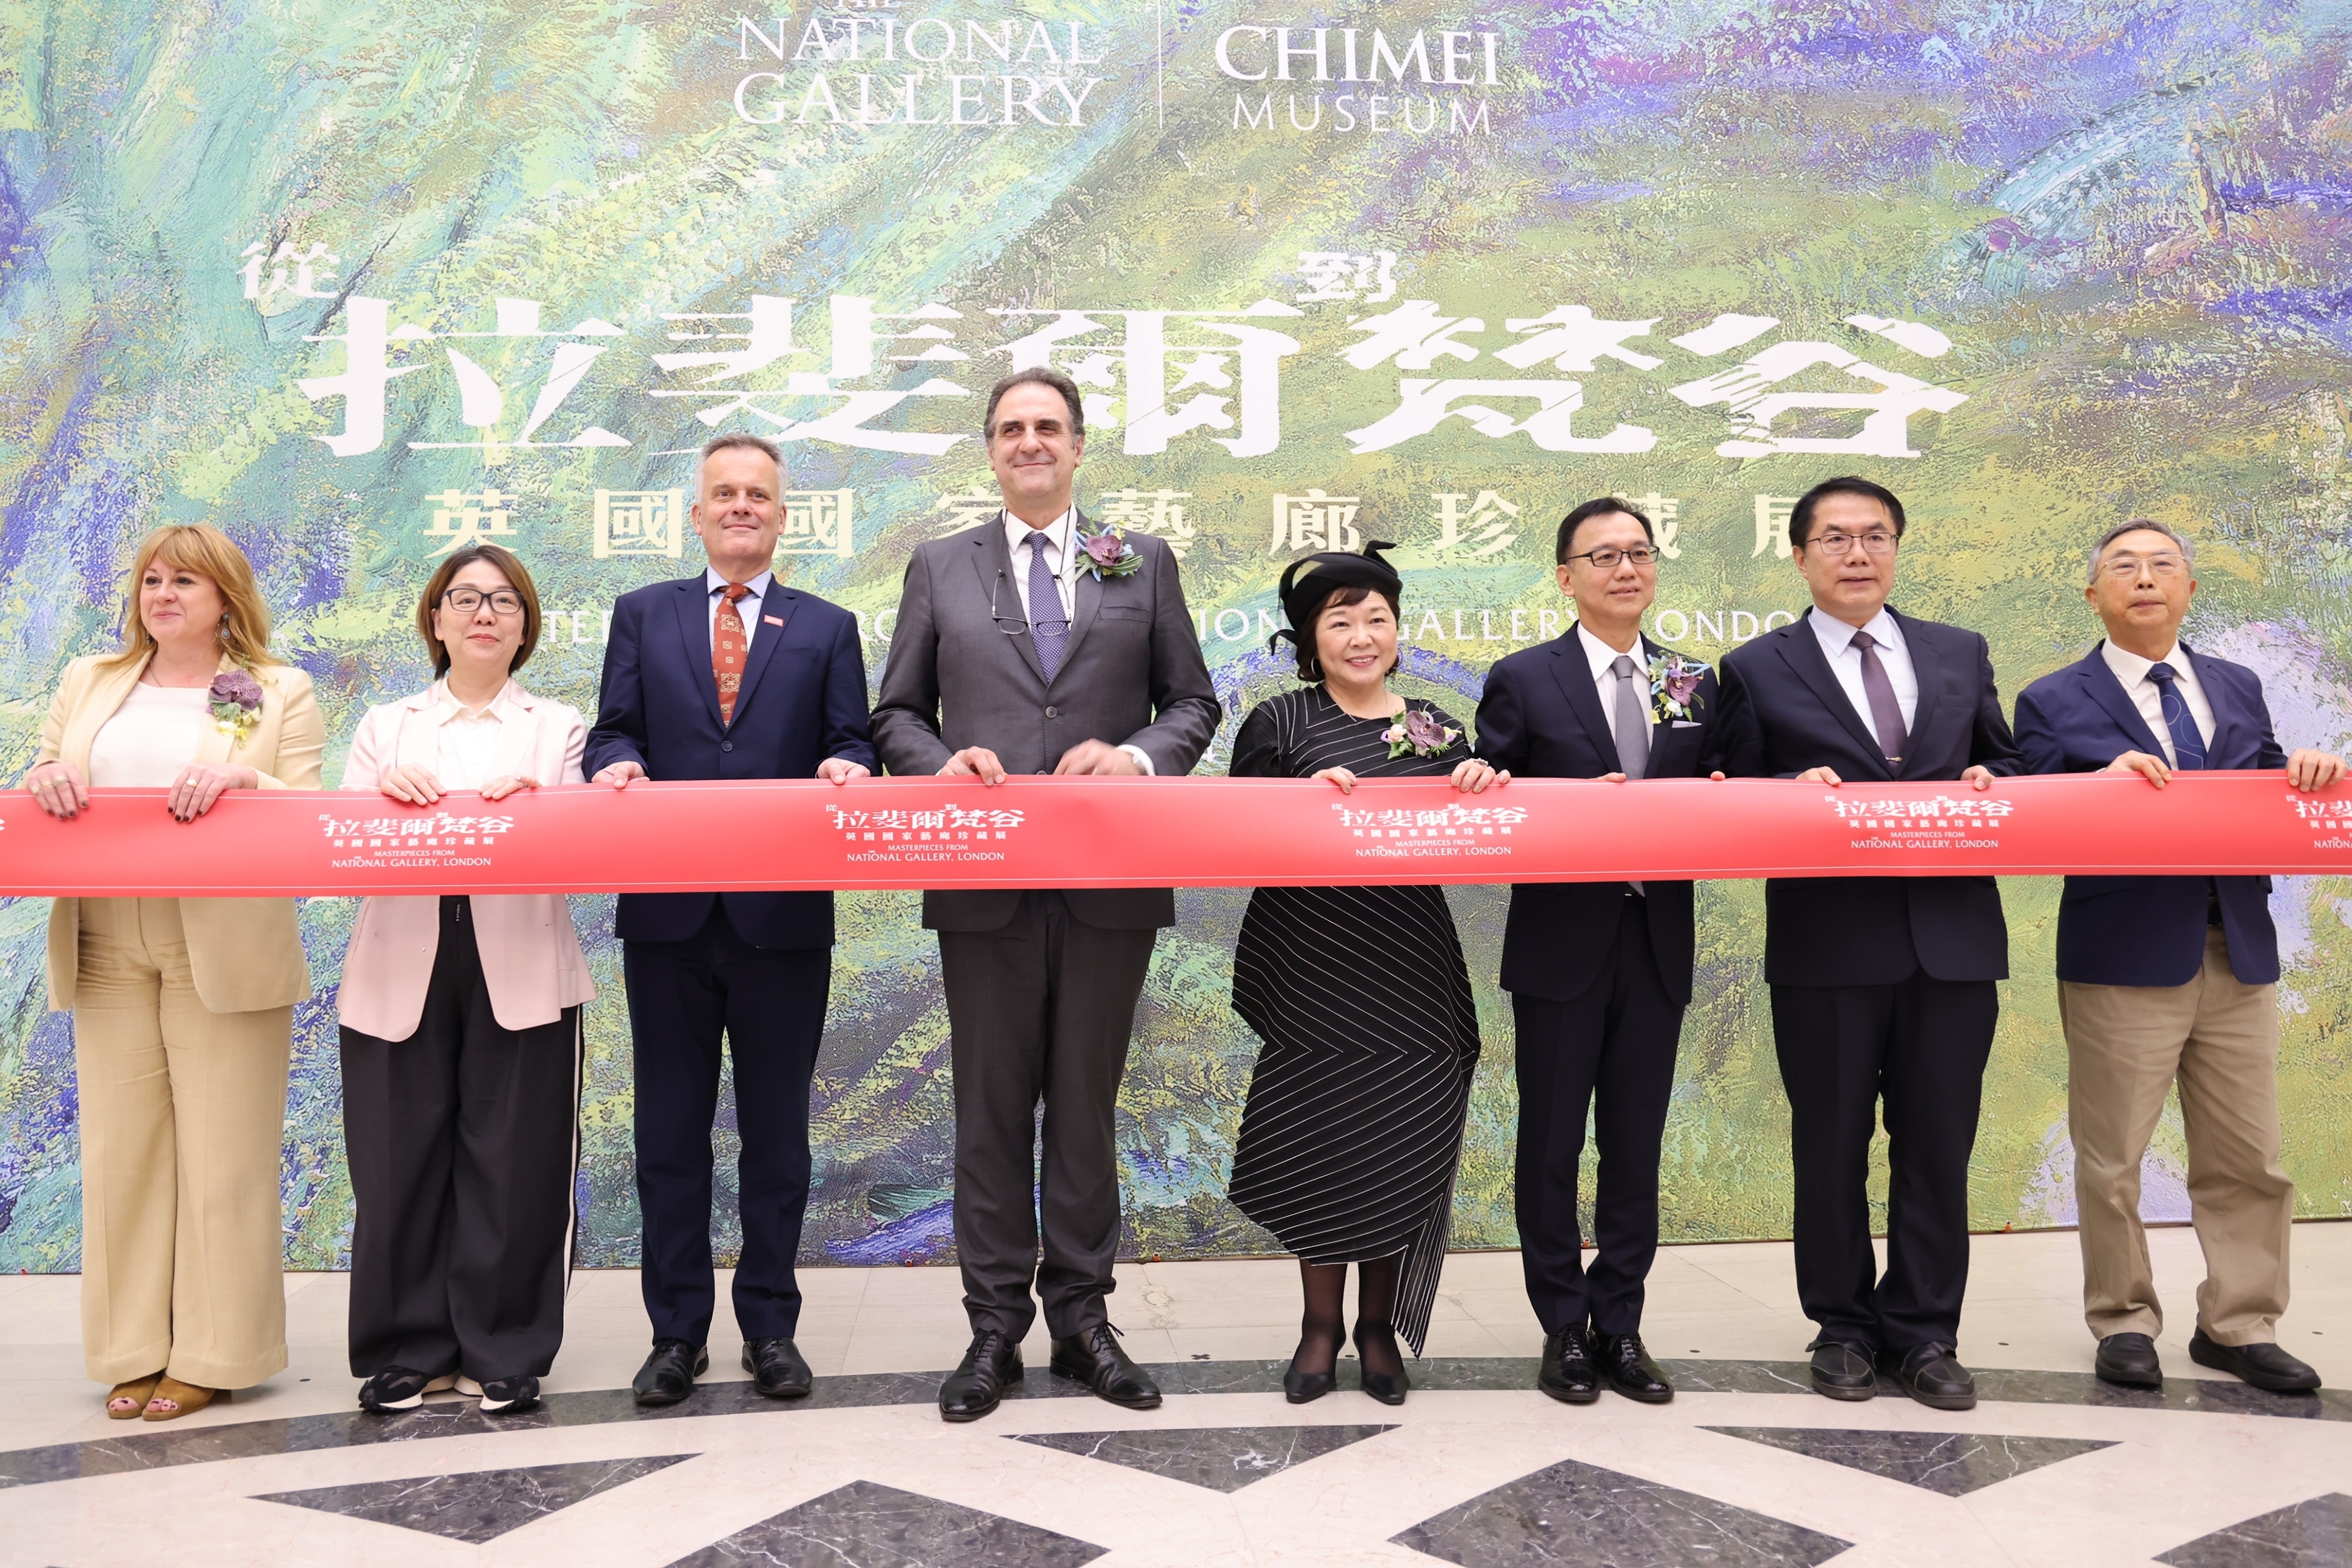 The Masterpieces From The National Gallery, London Exhibition Officially Opens, Tainan Mayor Invites All To Come Appreciate The Great Art Pieces